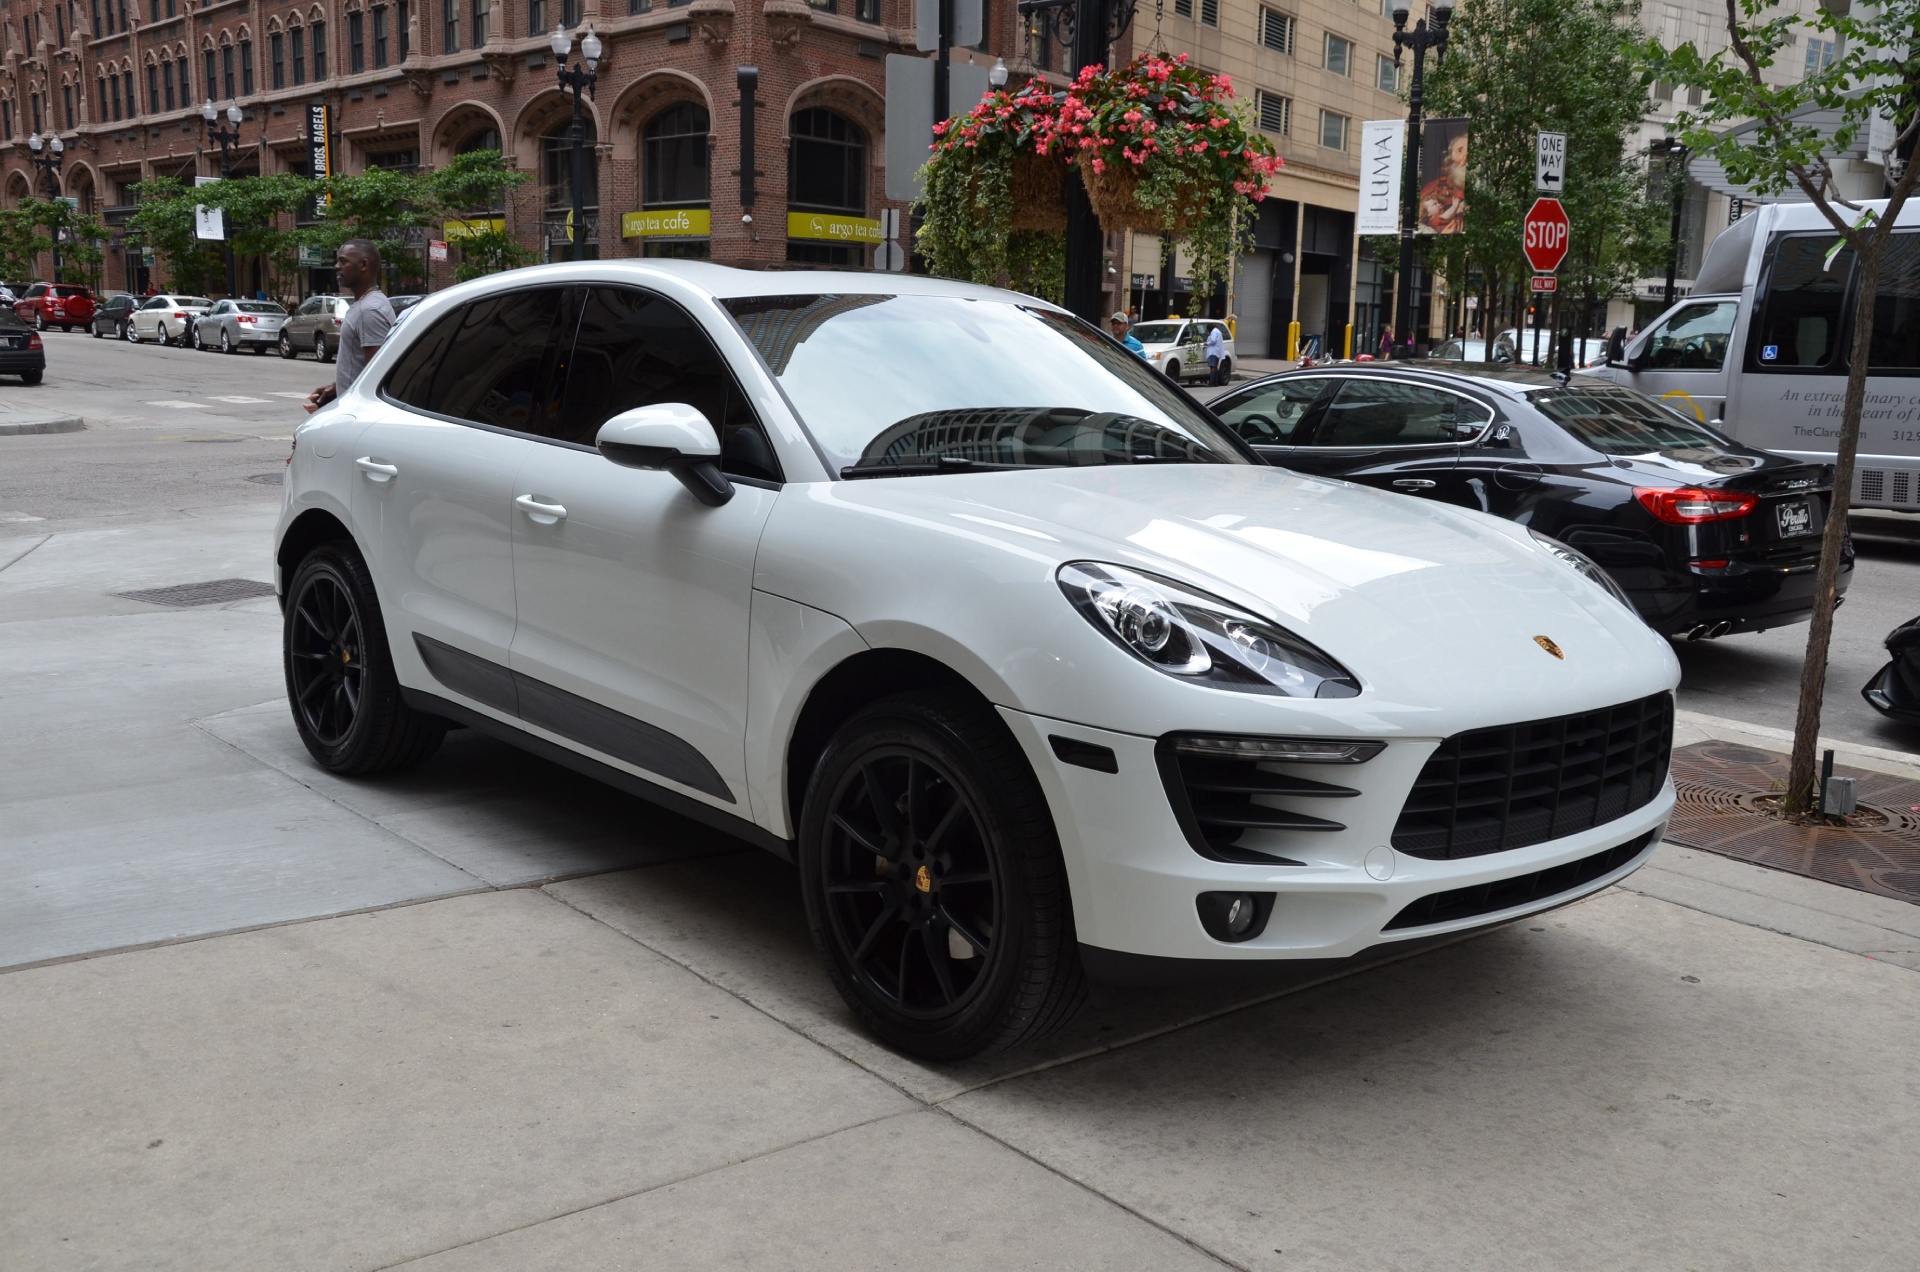 2015 PORSCHE MACAN S for sale by auction in London, United Kingdom